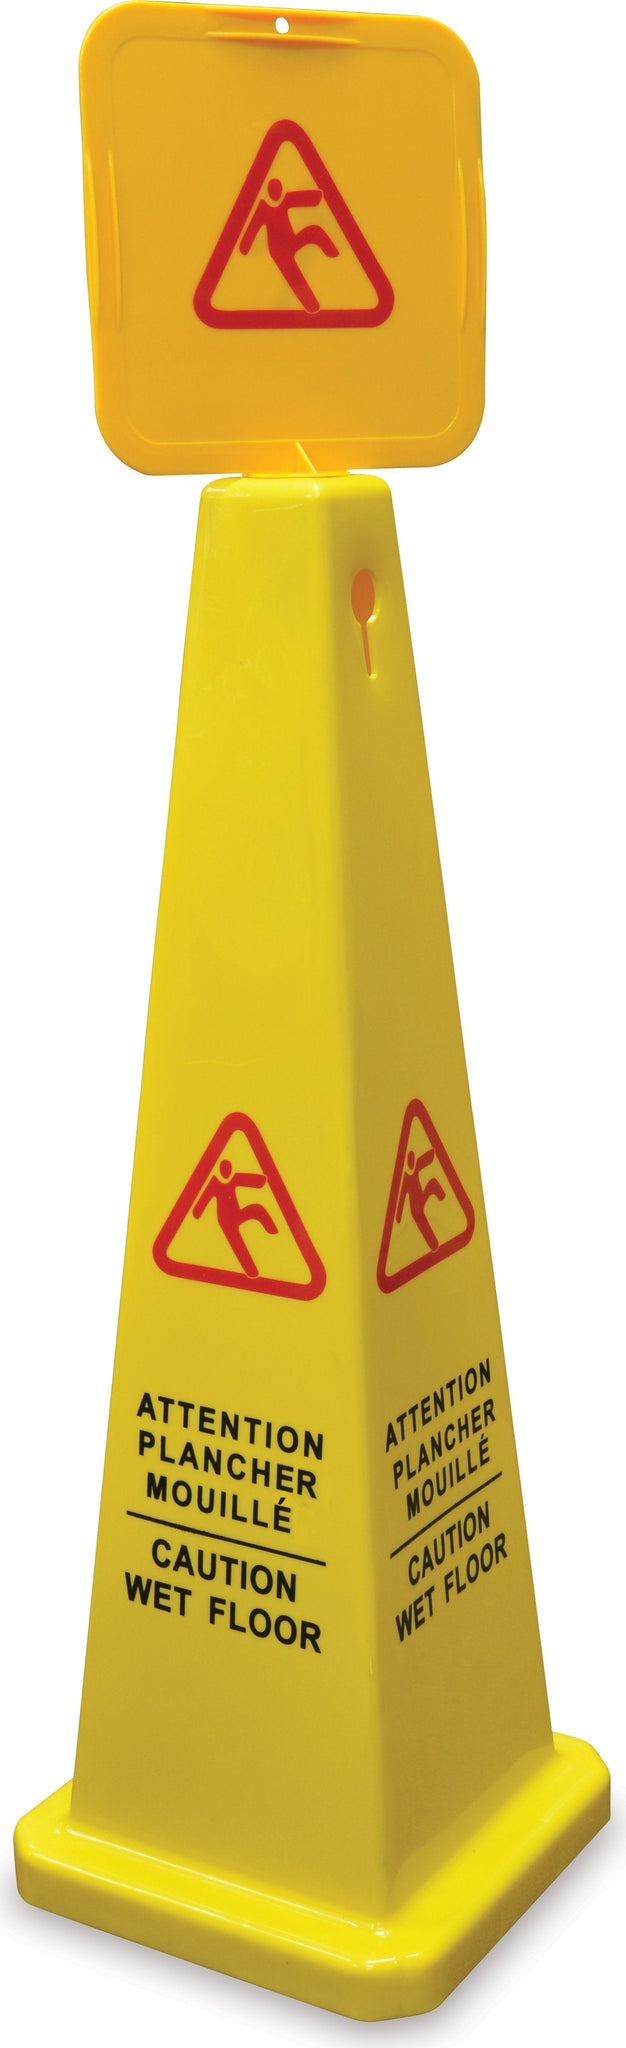 Omcan - English/French Four-Sided Caution Cone, 5/cs - 24417